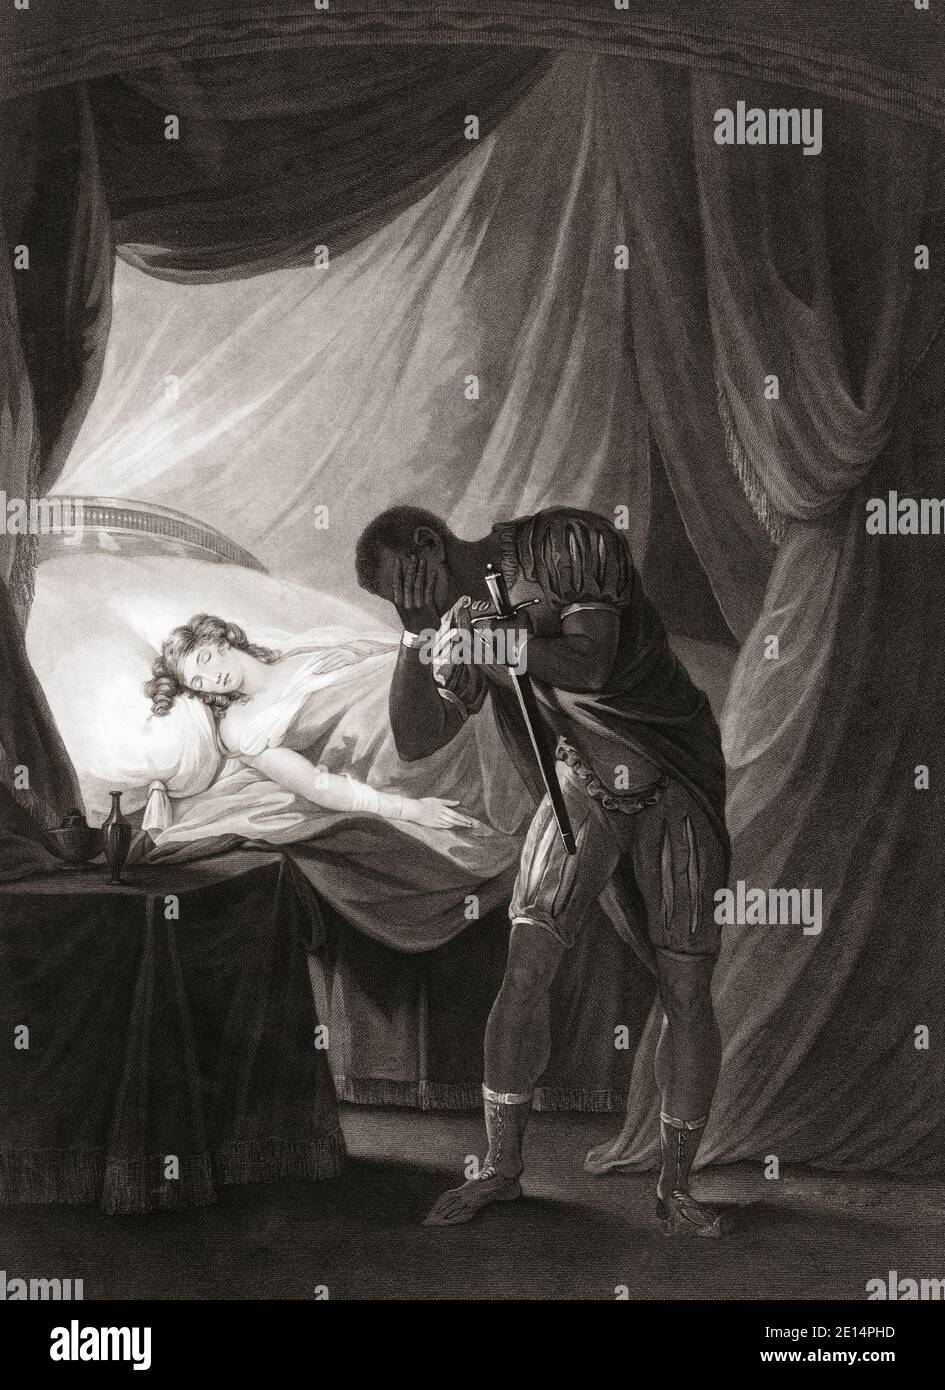 Illustration for William Shakespeare’s play Othello, Act V, Scene II.  From an 18th century engraving by William Leney after a work by  Josiah Boydell. Stock Photo